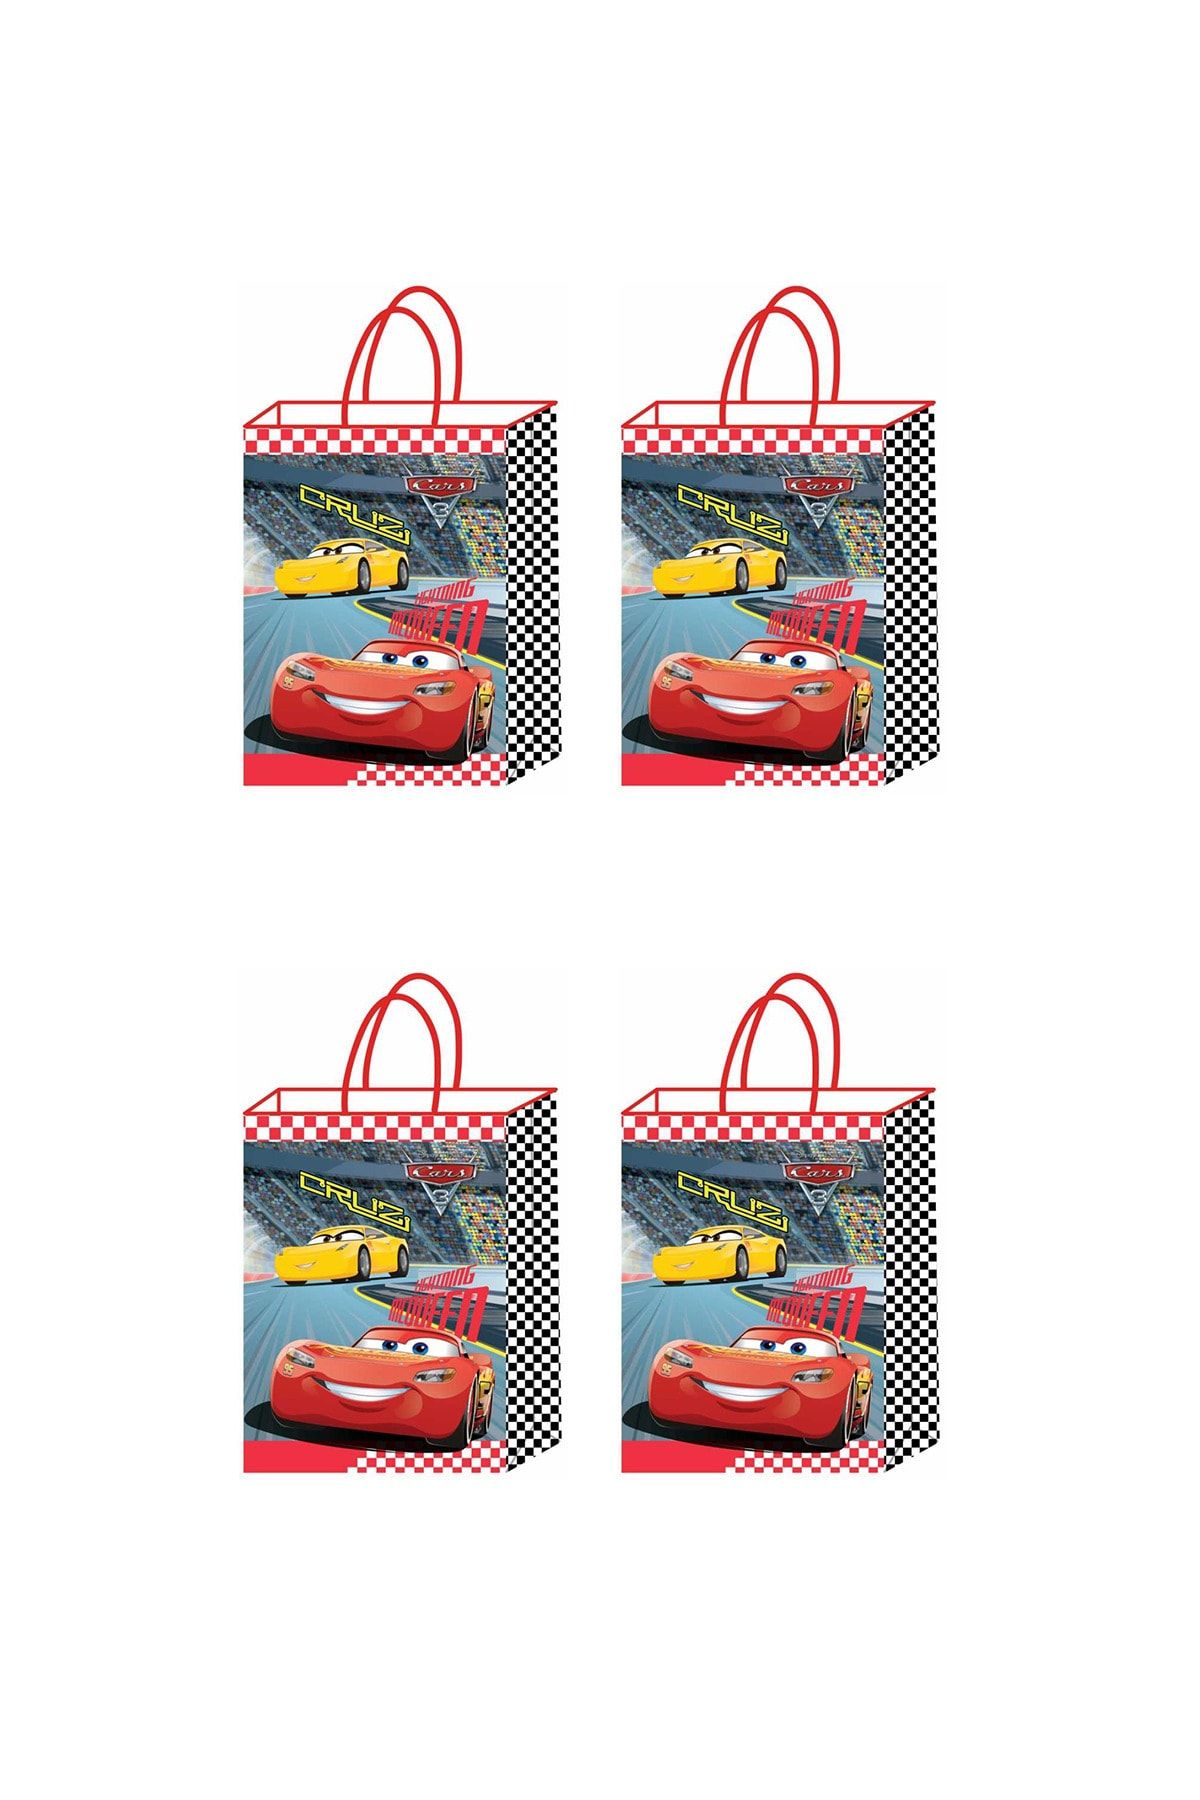 24PC Disney Cars Goodie Bags Party Favor Bags Gift Bags : Amazon.in: Toys &  Games